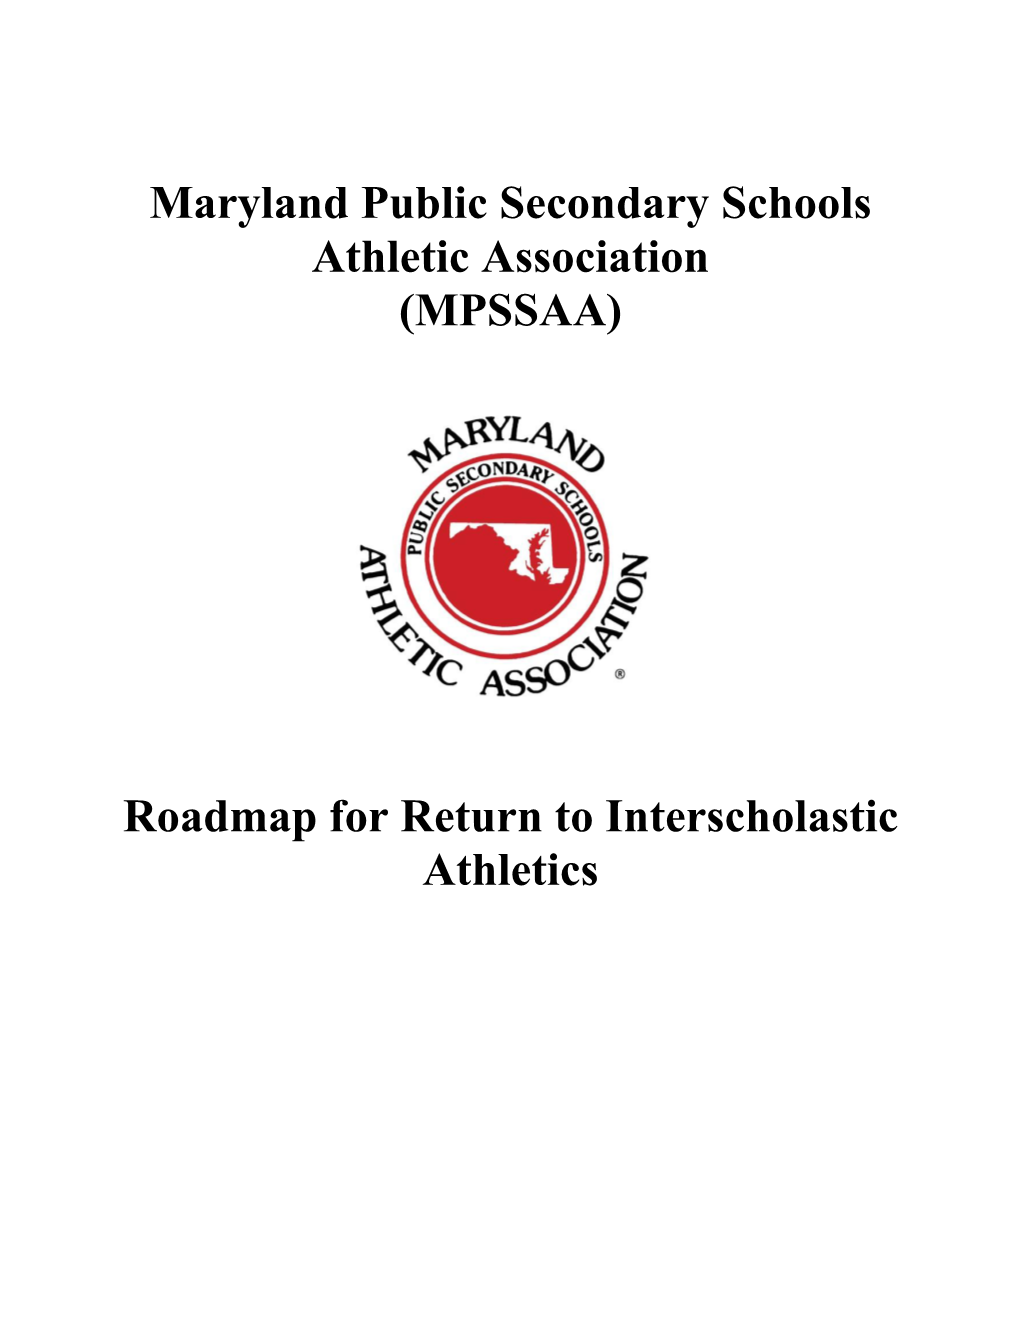 (MPSSAA) Roadmap for Return to Interscholastic Athletics Table of Contents 3| Introduction, Where We Are 4| I